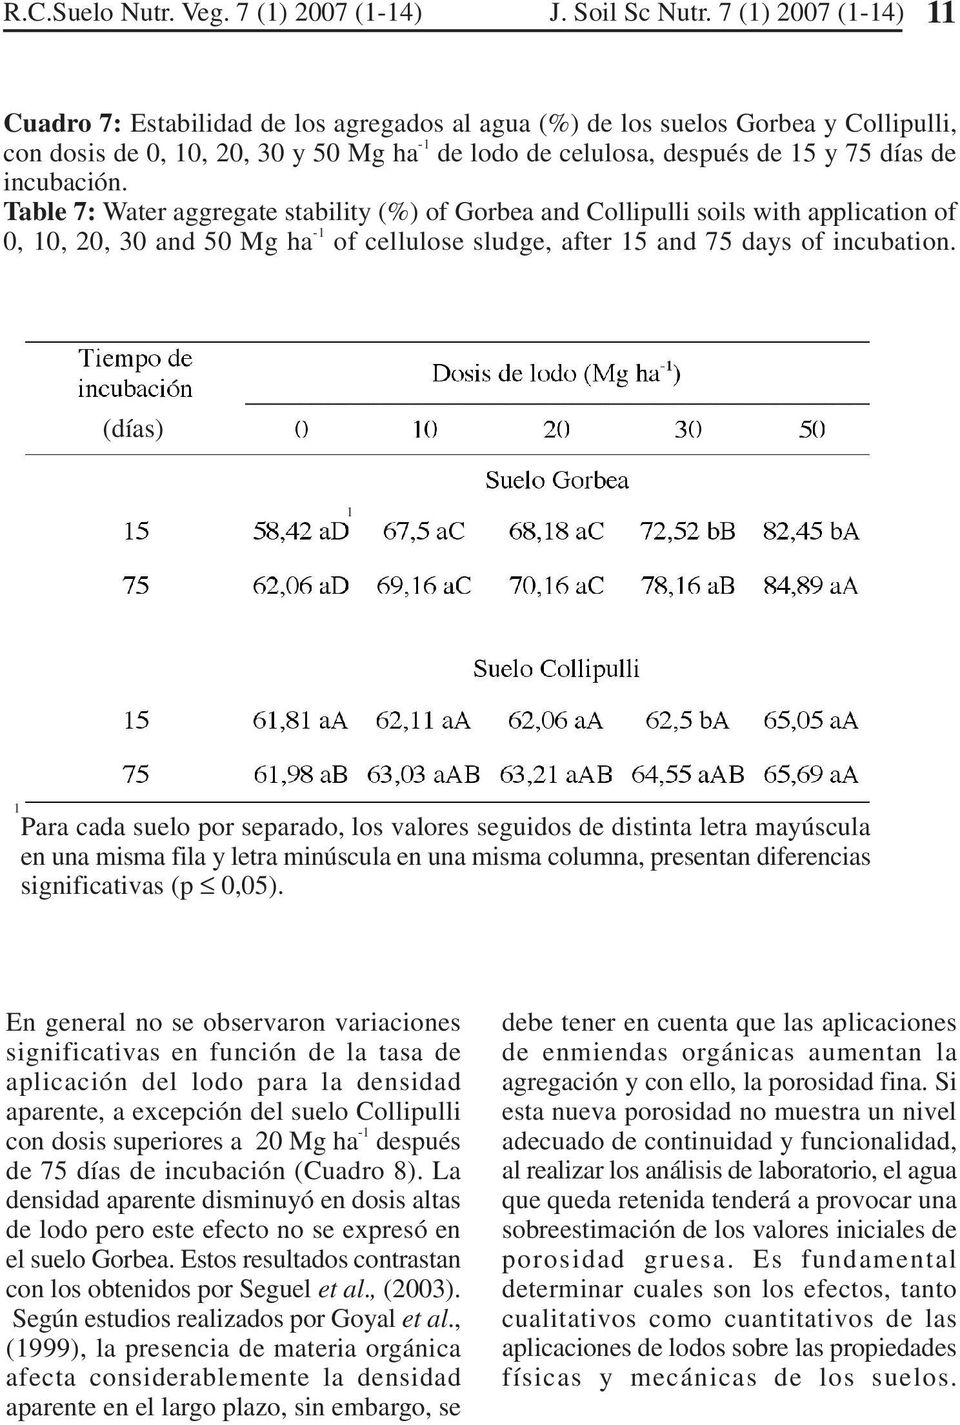 Table 7: Water aggregate stability (%) of Gorbea and Collipulli soils with application of 0, 0, 20, 30 and 50 Mg ha - of cellulose sludge, after 5 and 75 days of incubation.